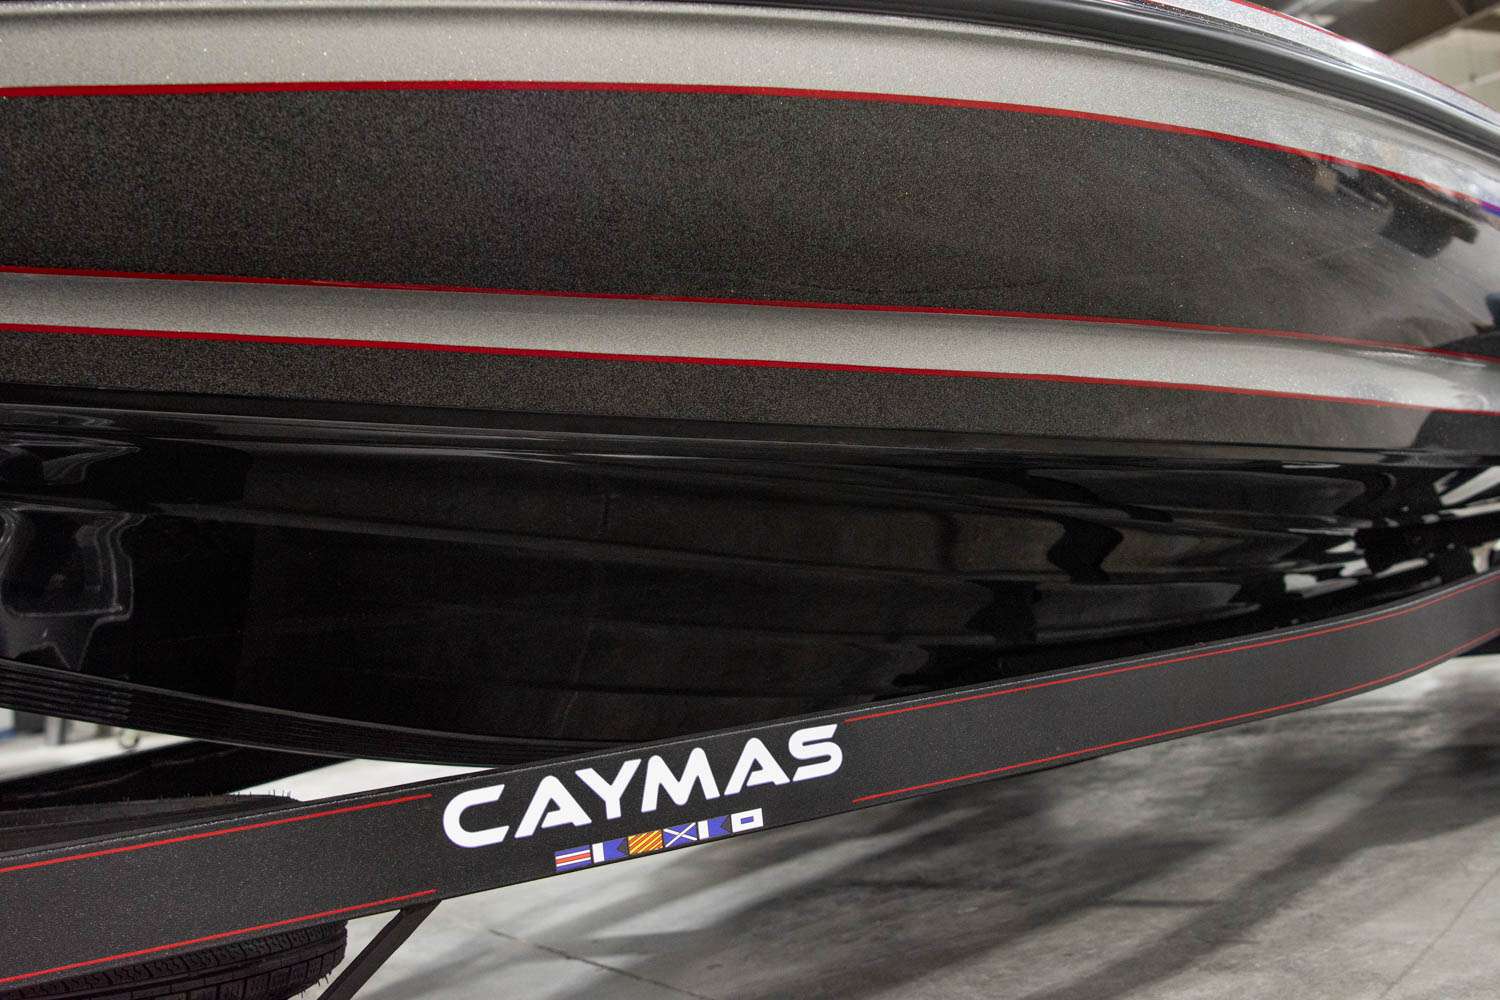 The Caymas trailer comes standard with a swing-tongue, custom aluminum wheels, lighted step pads and LED lights.
